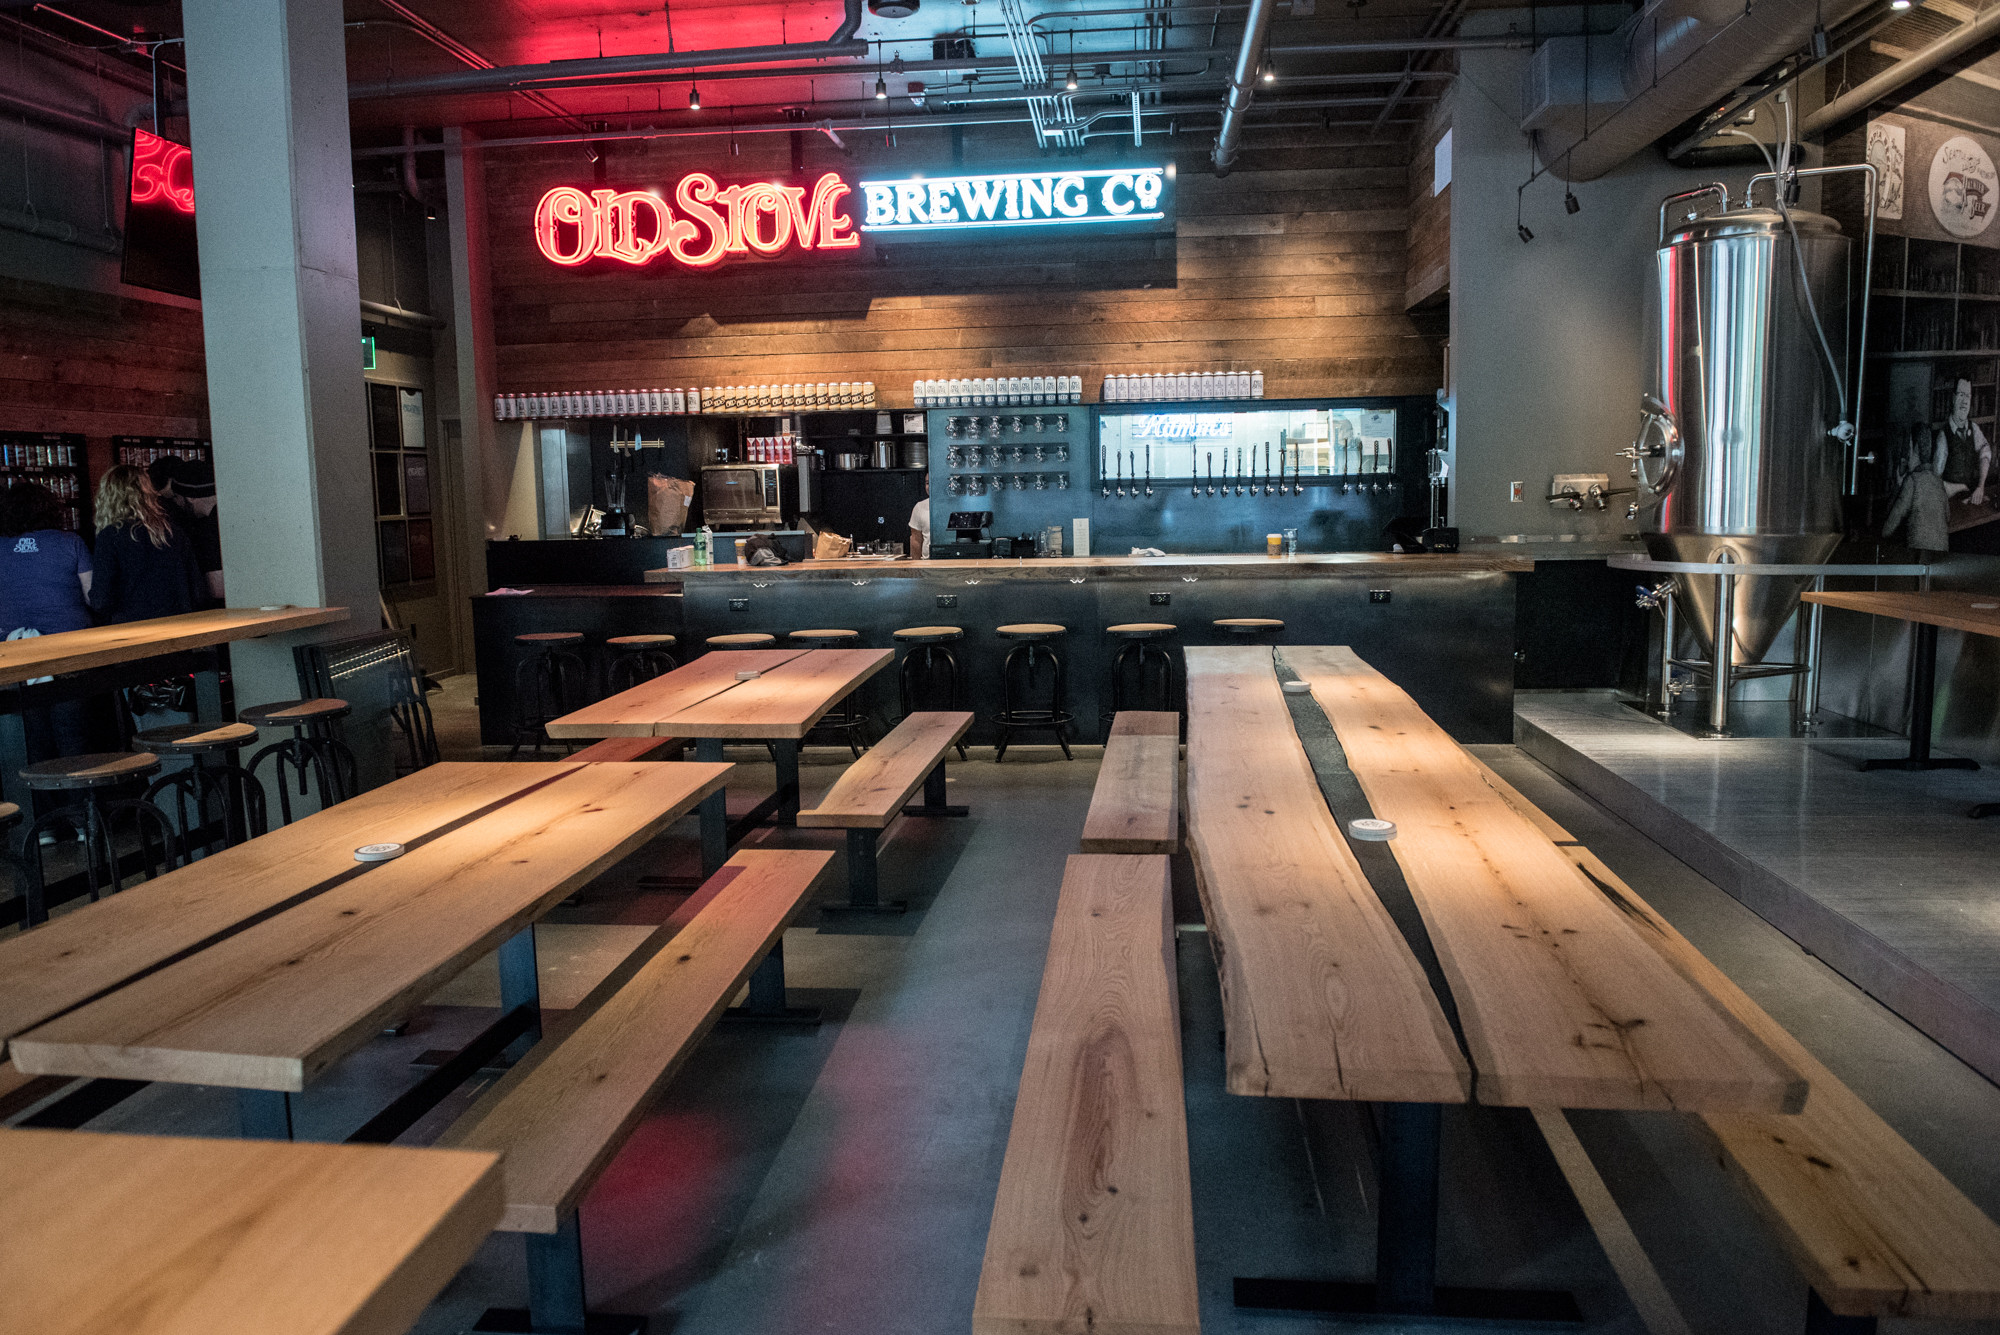 21 Cute Hardwood Flooring Detroit Mi 2024 free download hardwood flooring detroit mi of tour inside old stove brewing now open in pike place market eater regarding tour inside old stove brewing now open in pike place market